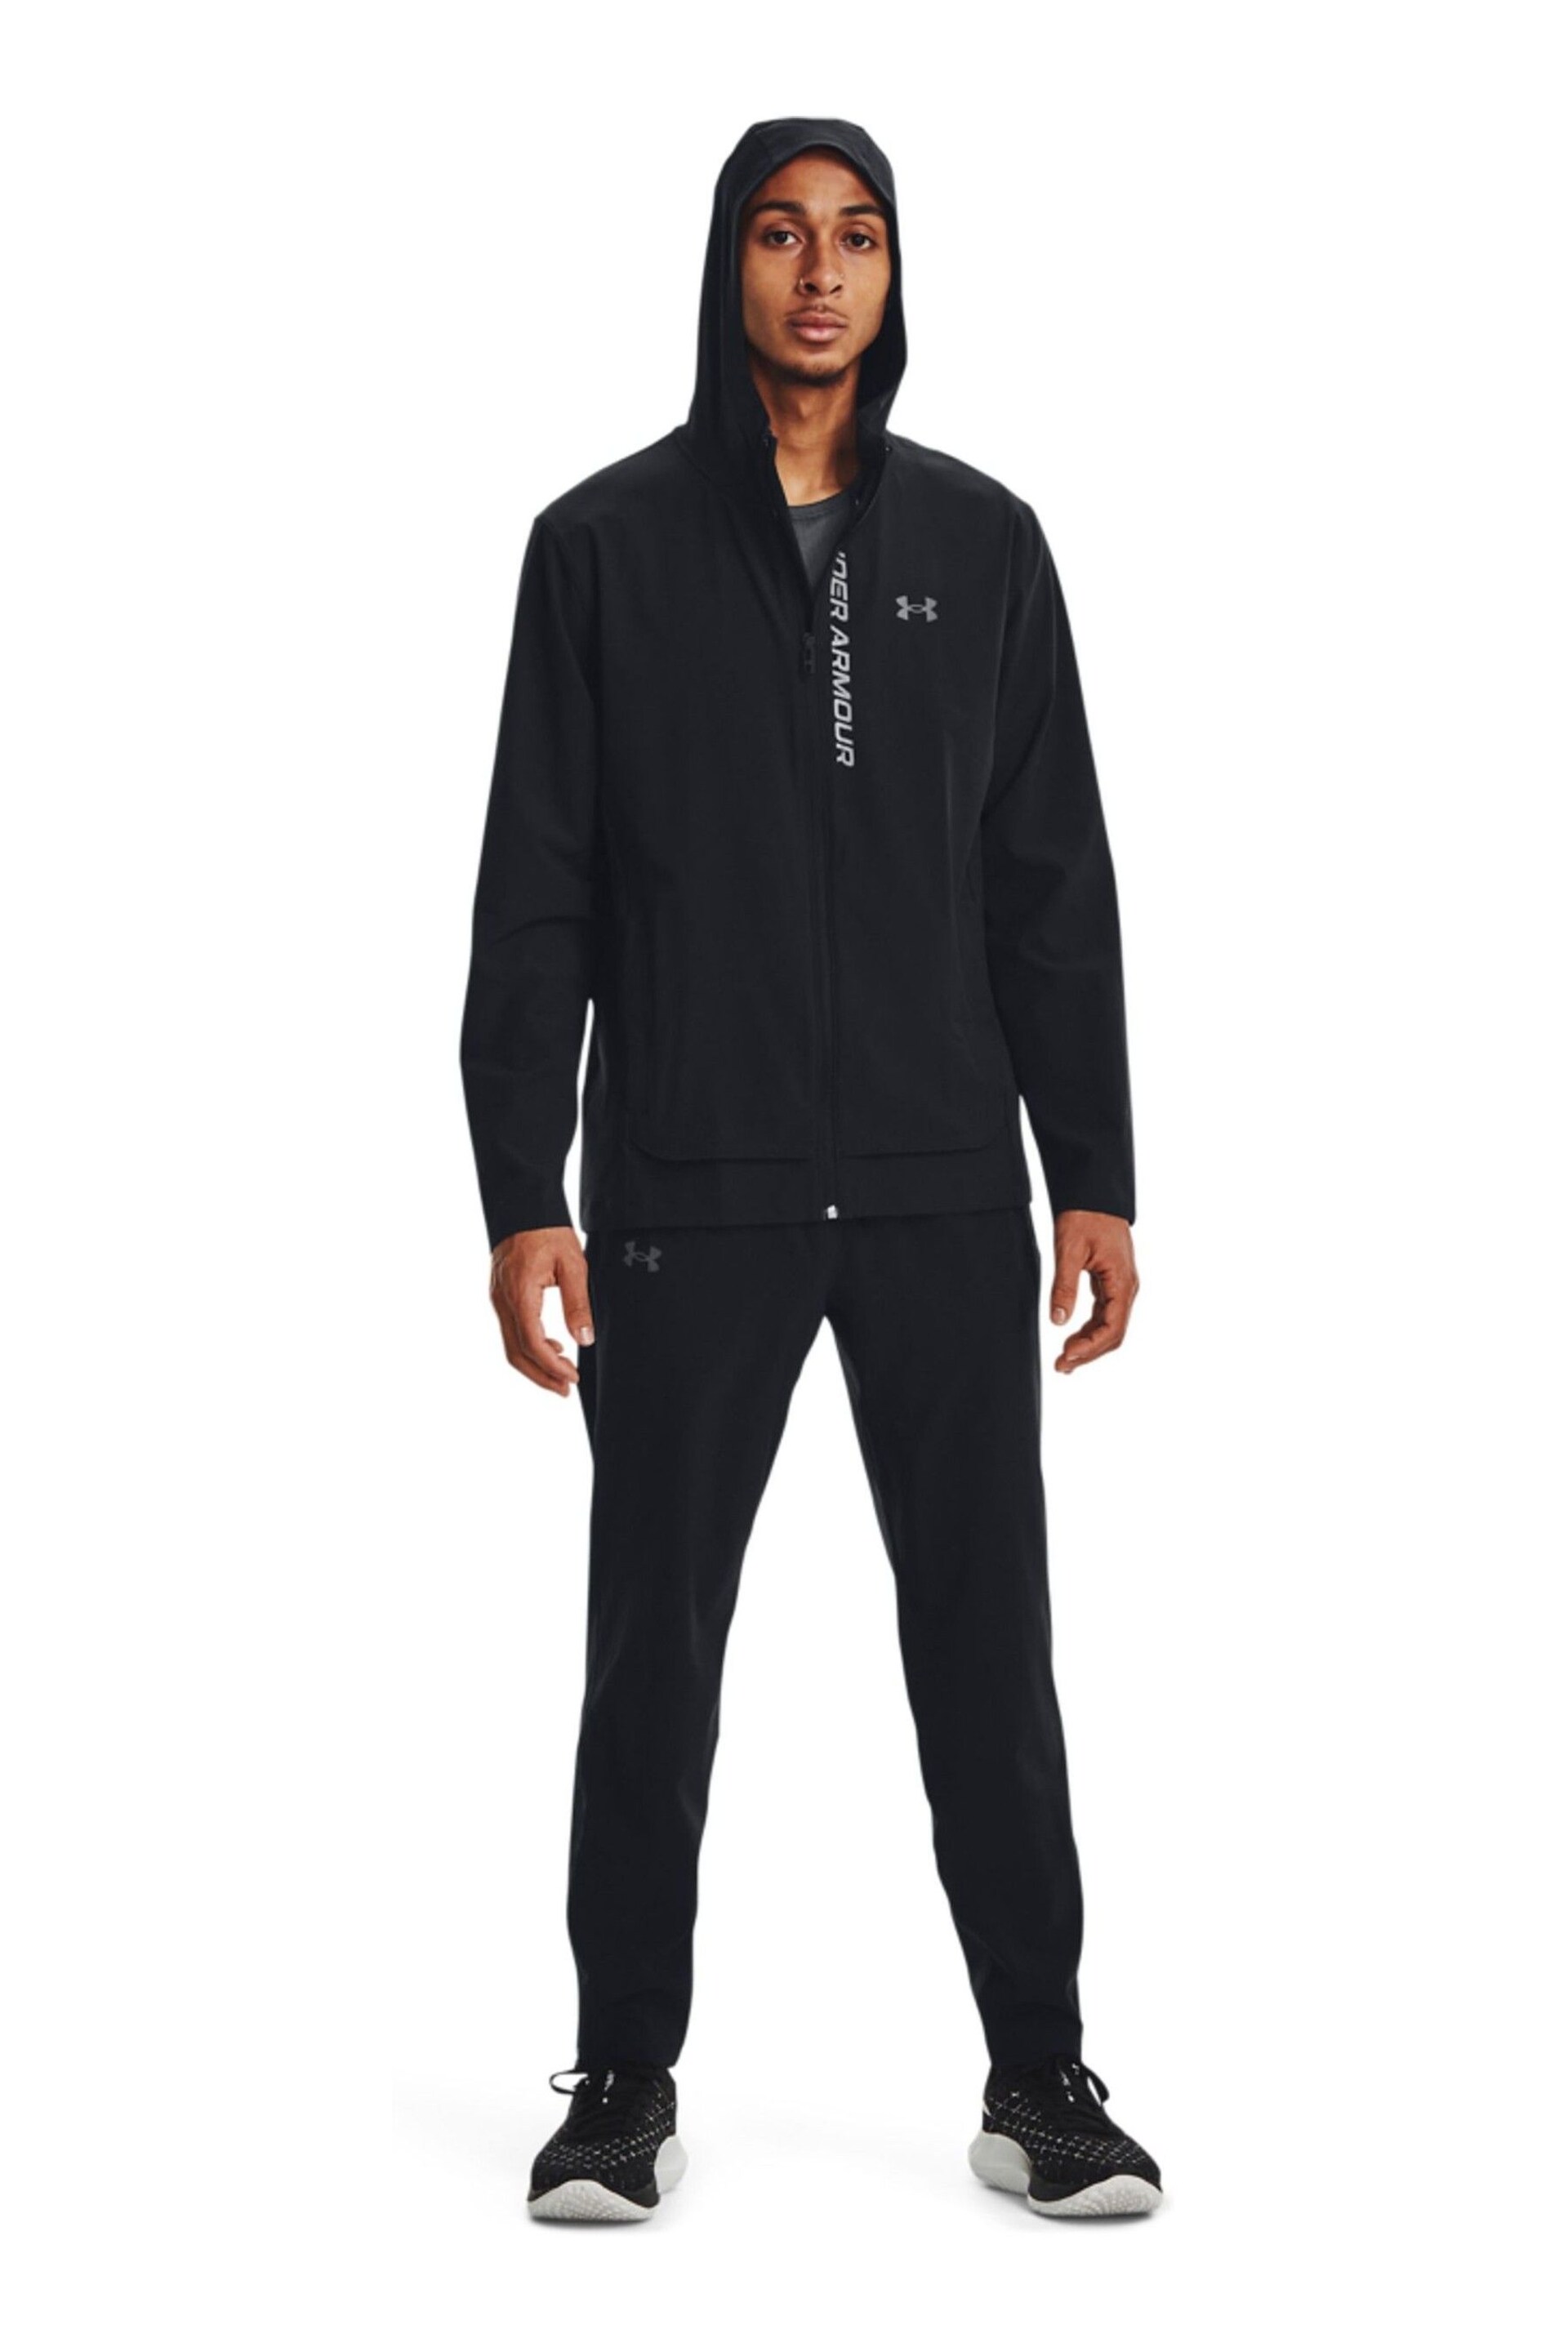 Under Armour Outrun The Storm Black Jacket - Image 5 of 19